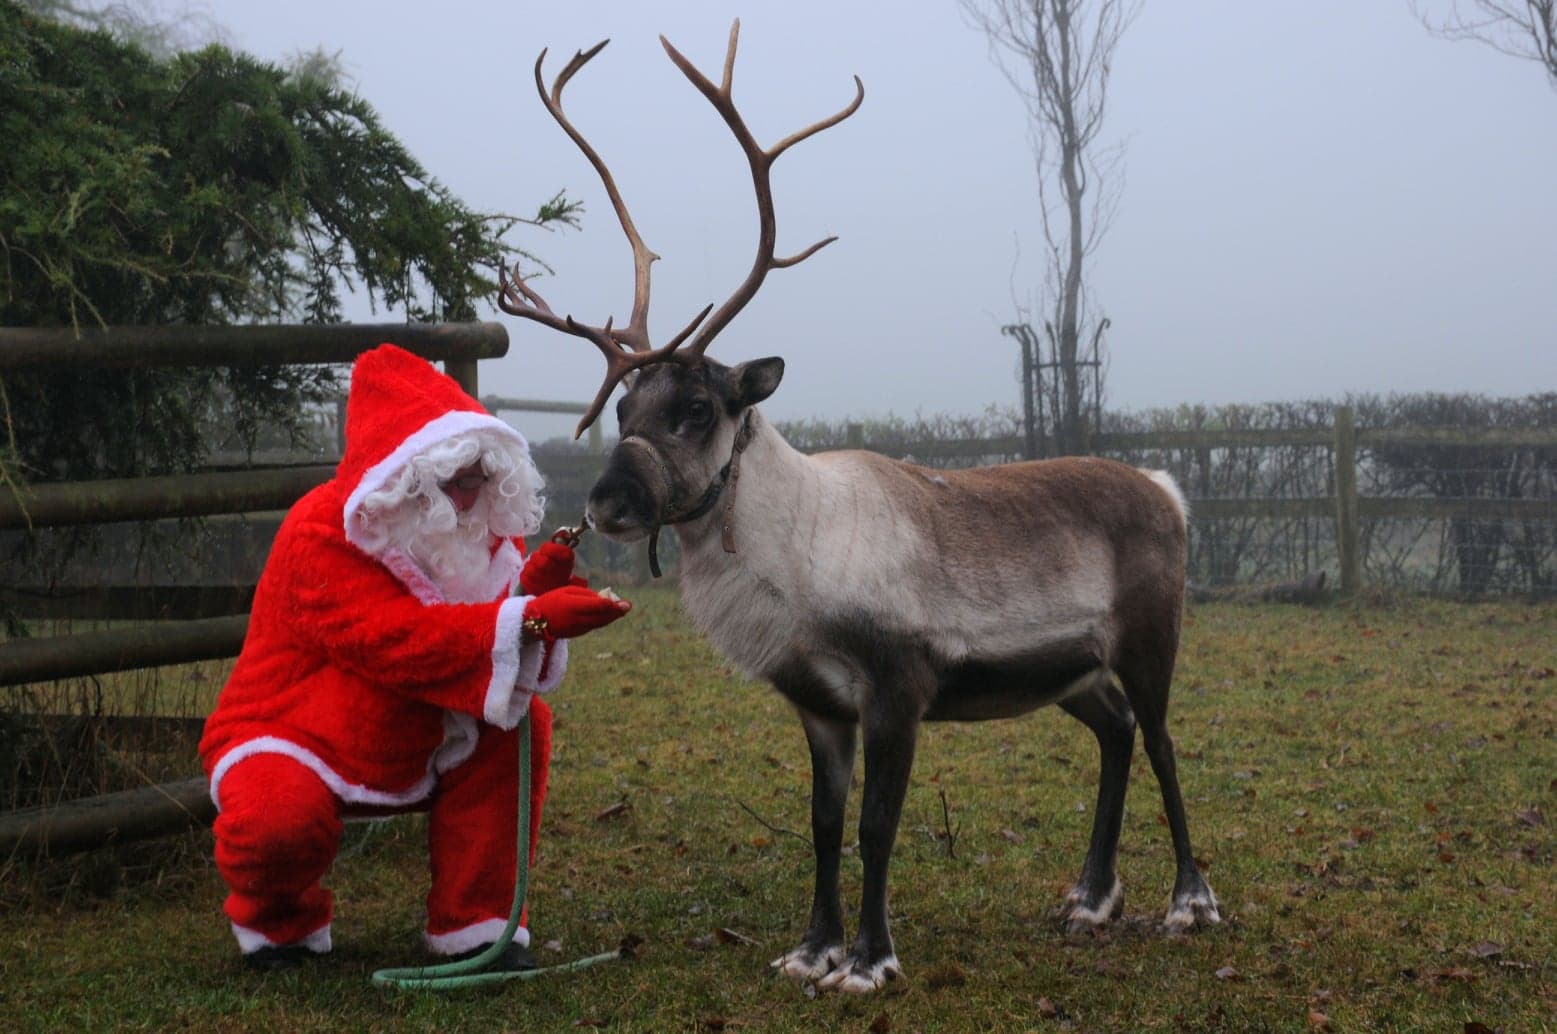 FEATURED | Lockdown lifted and Santa has arrived in Kington!